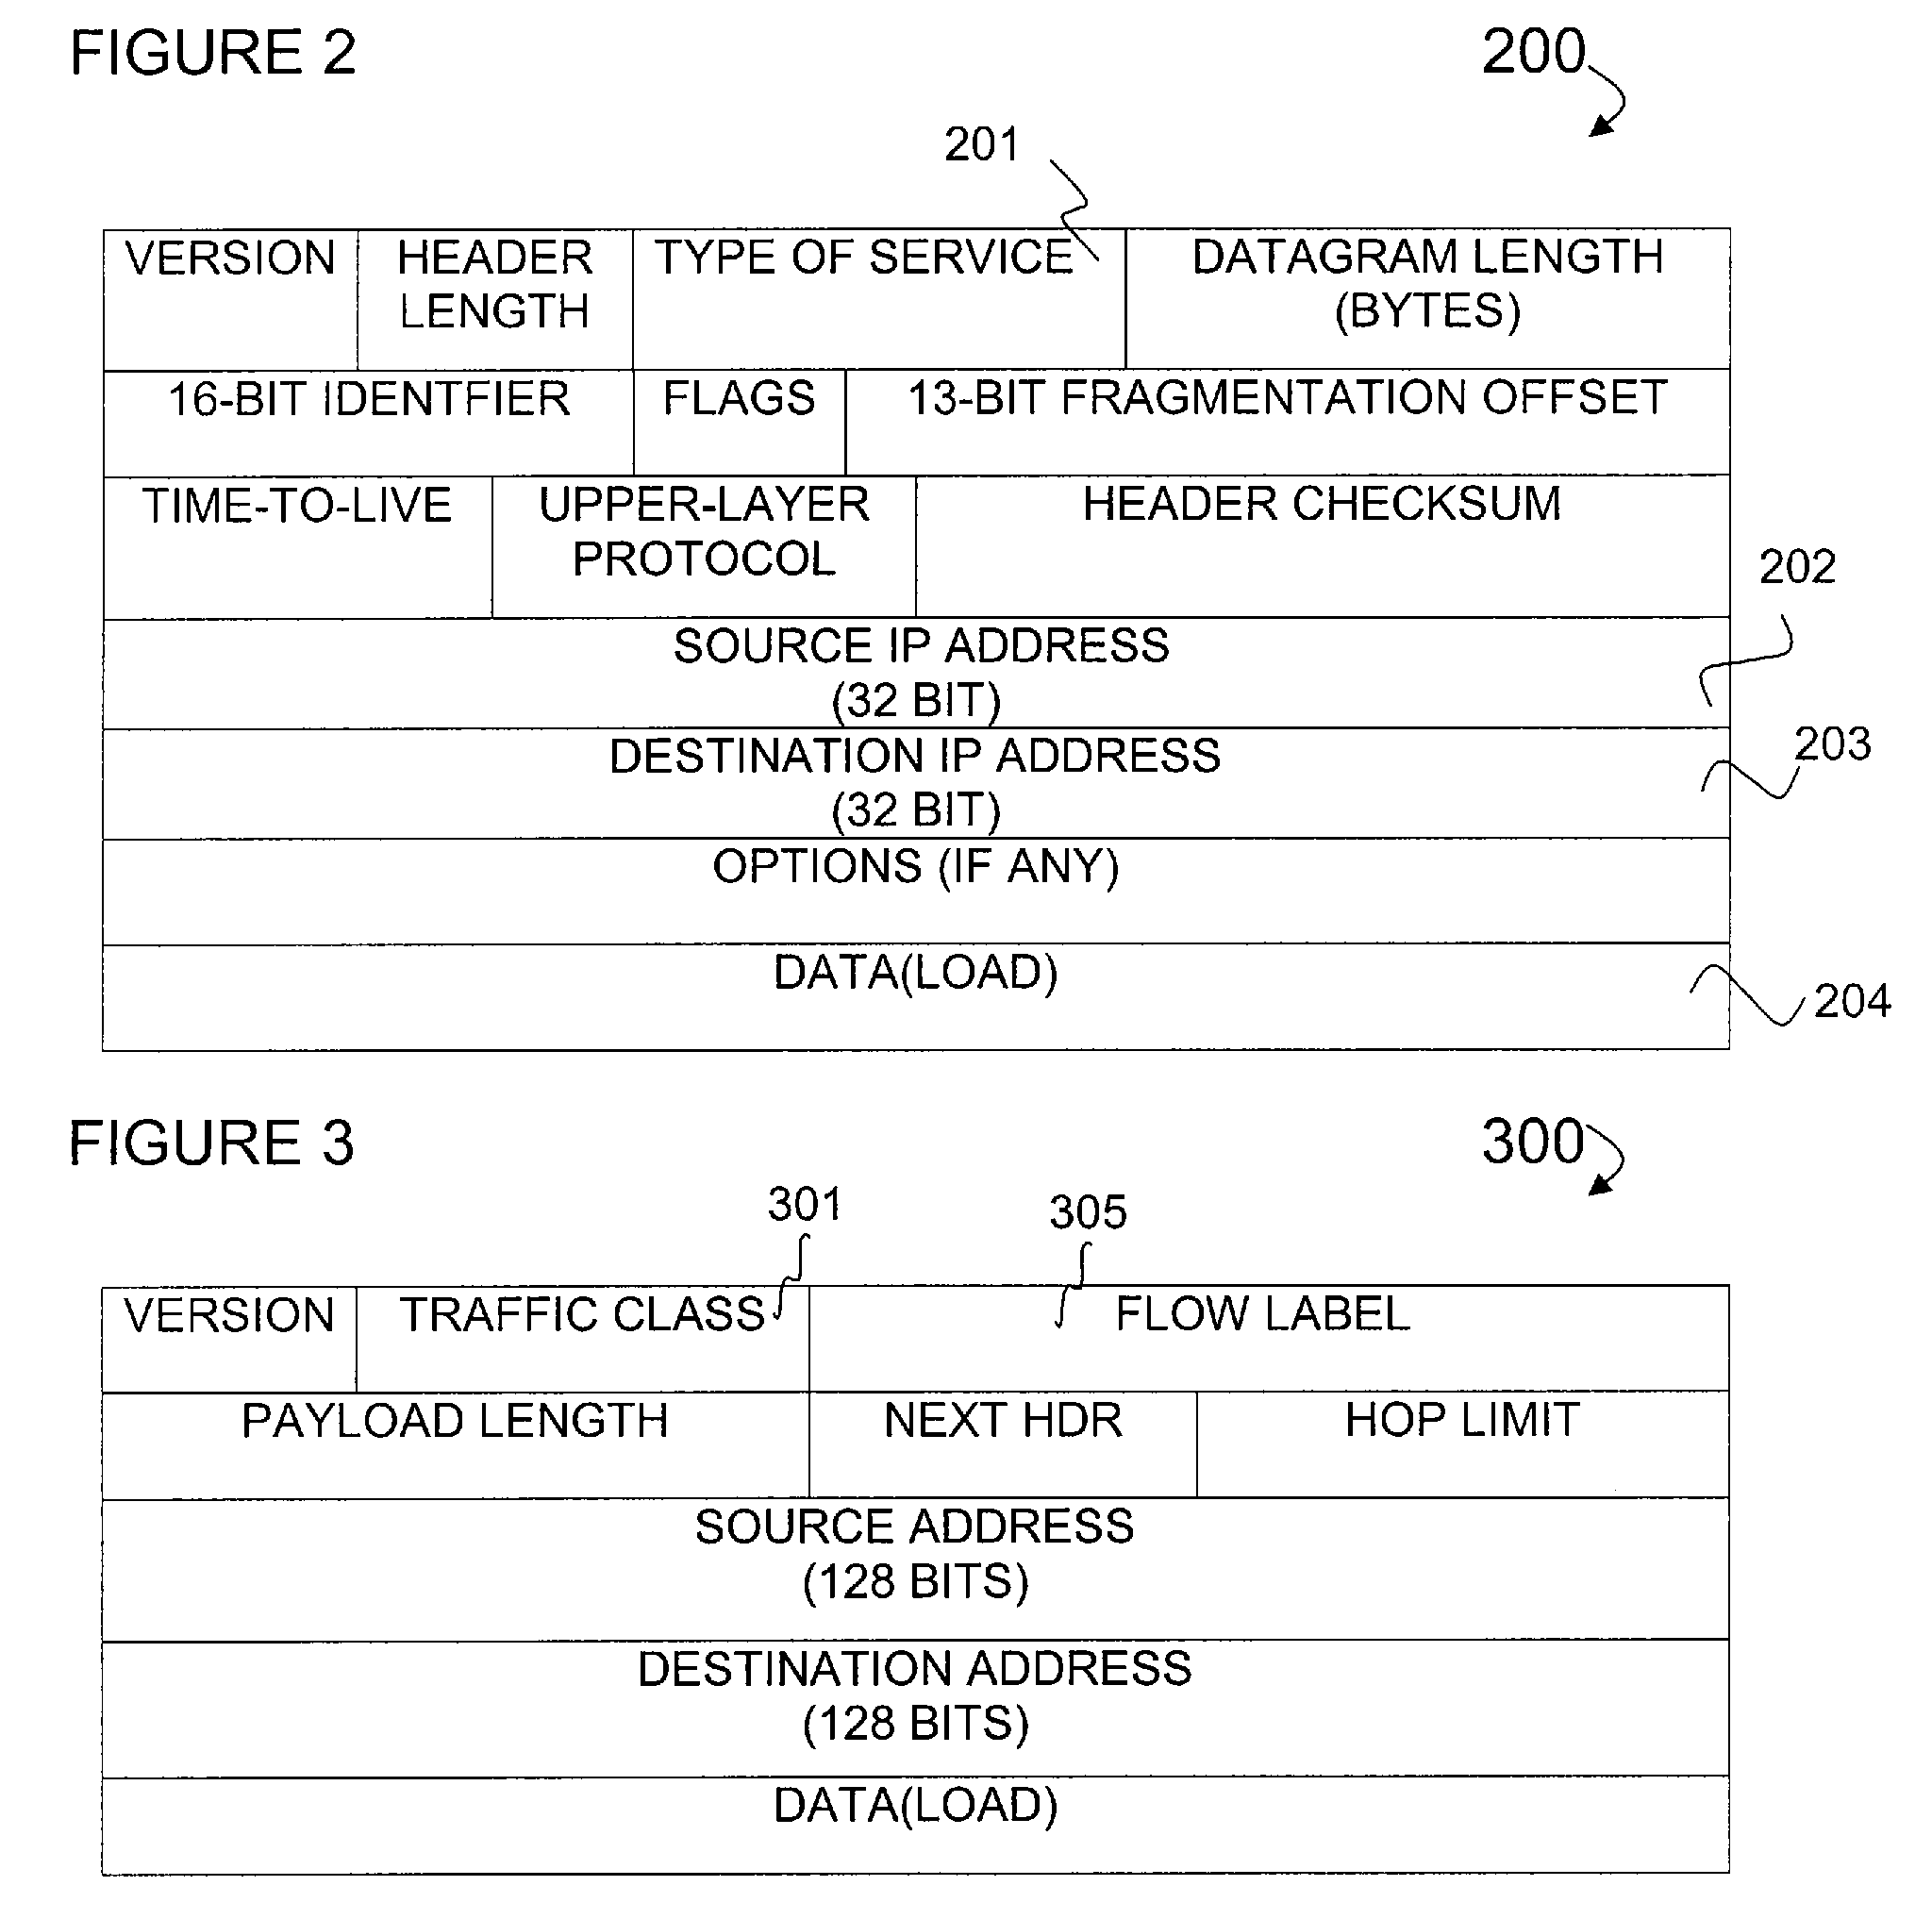 Indicating or remarking of a dscp for rtp of a flow
(CALL) to and from a server